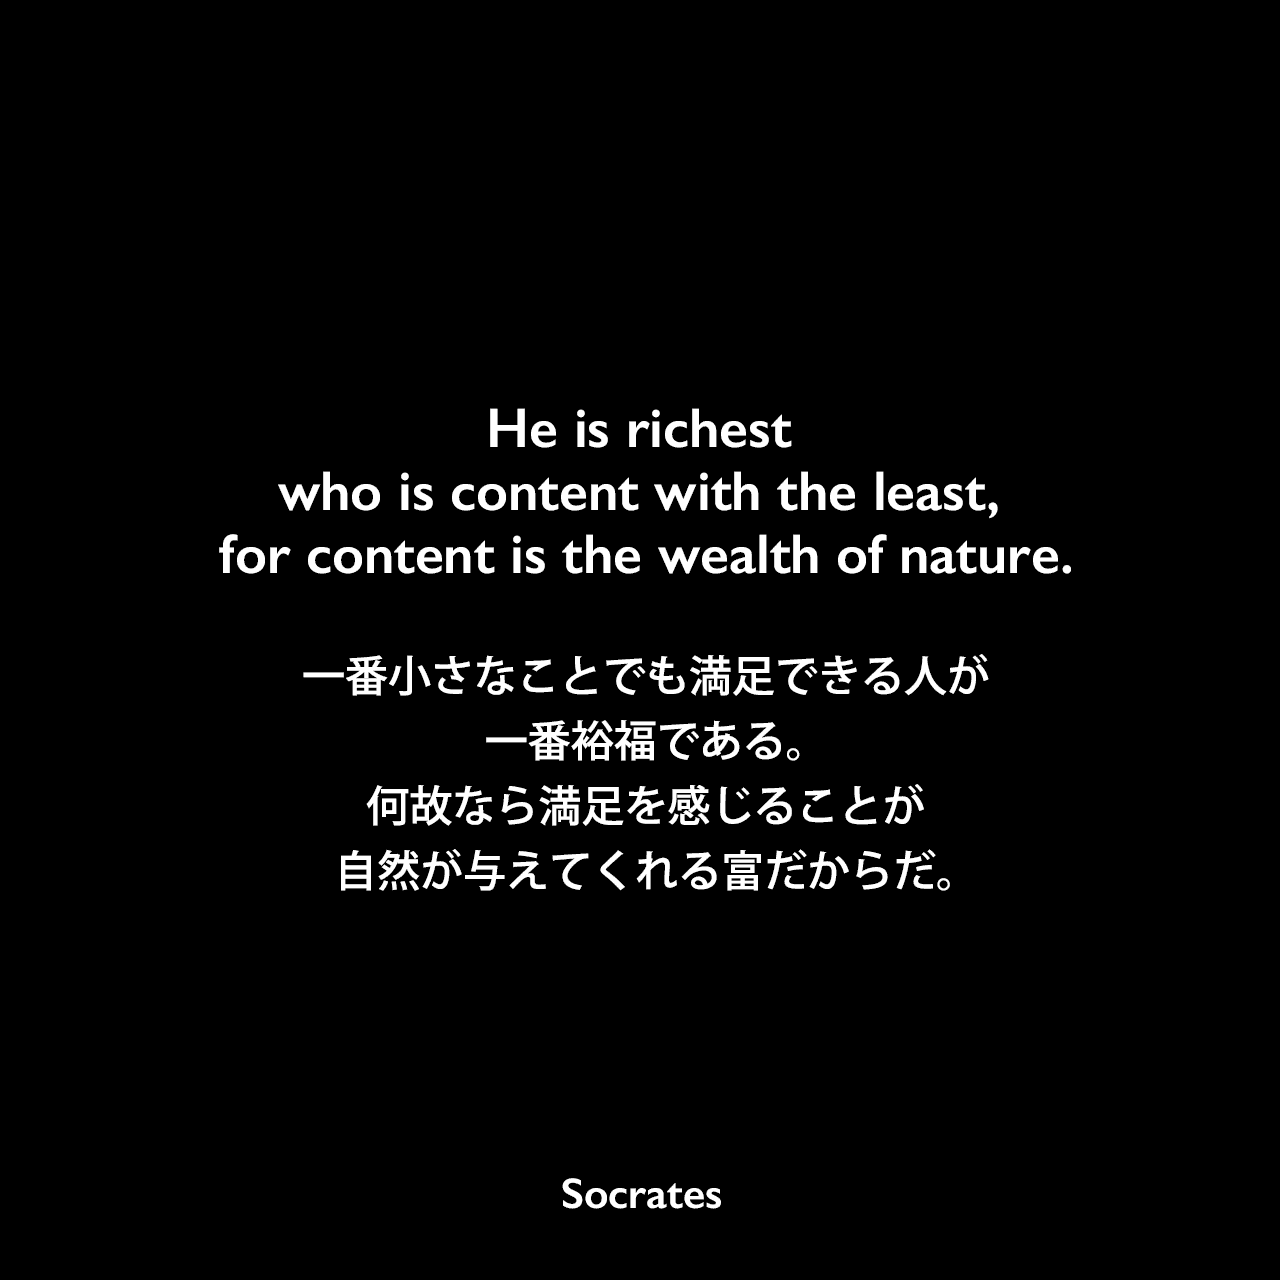 He is richest who is content with the least, for content is the wealth of nature.一番小さなことでも満足できる人が一番裕福である。何故なら満足を感じることが自然が与えてくれる富だからだ。Socrates